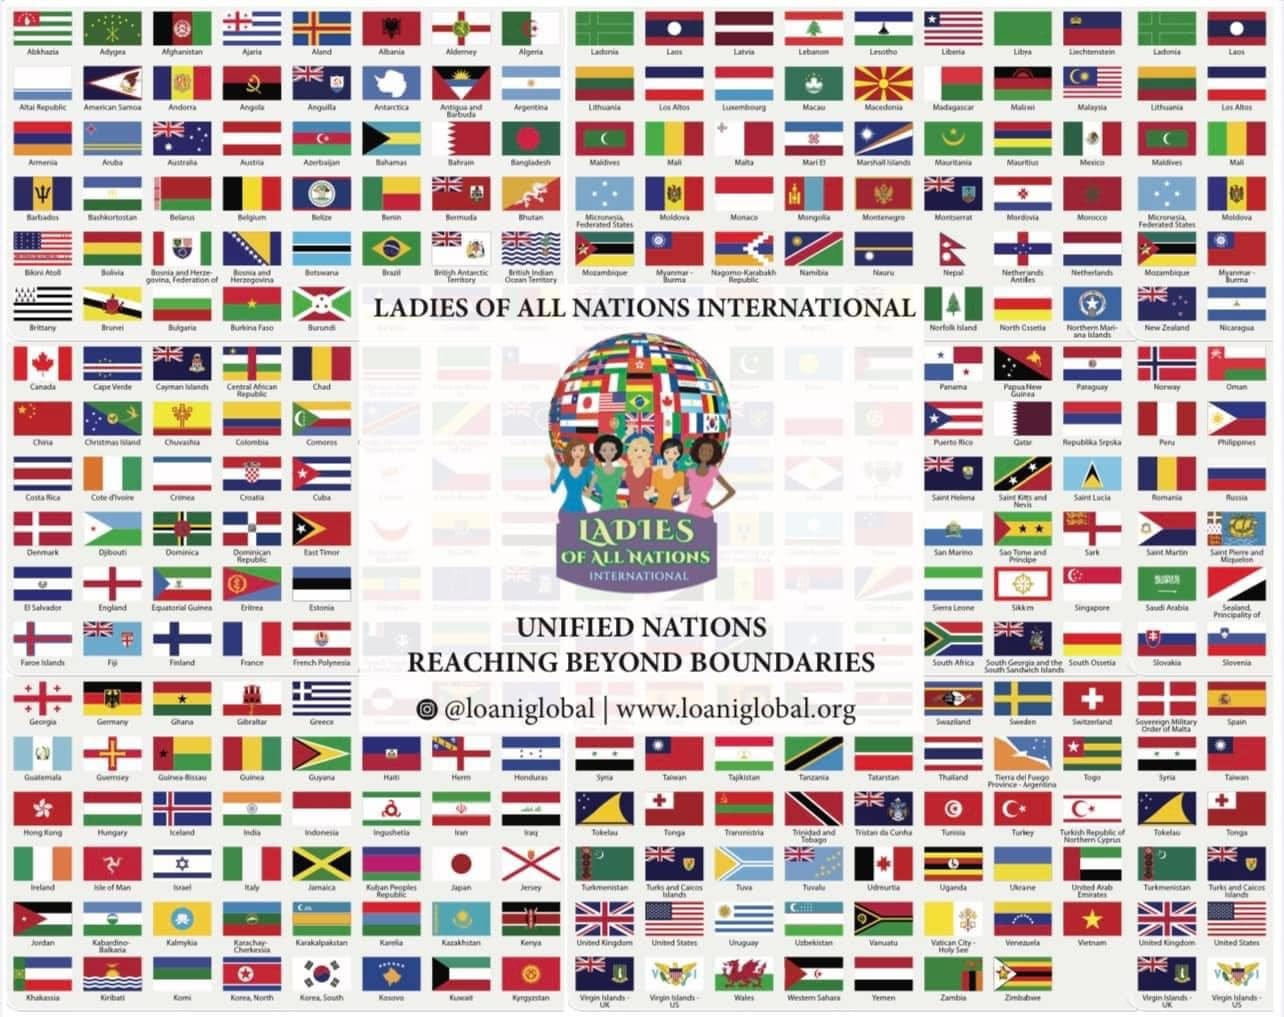 May be a graphic of map and text that says 'Neraegeuina Poma LADIES OF ALL NATIONS INTERNATIONAL LADIES OF LNATIONS INTERNATIONAL UNIFIED NATIONS REACHING BEYOND BOUNDARIES @loaniglobal www.loaniglobal.org Epgandan C'